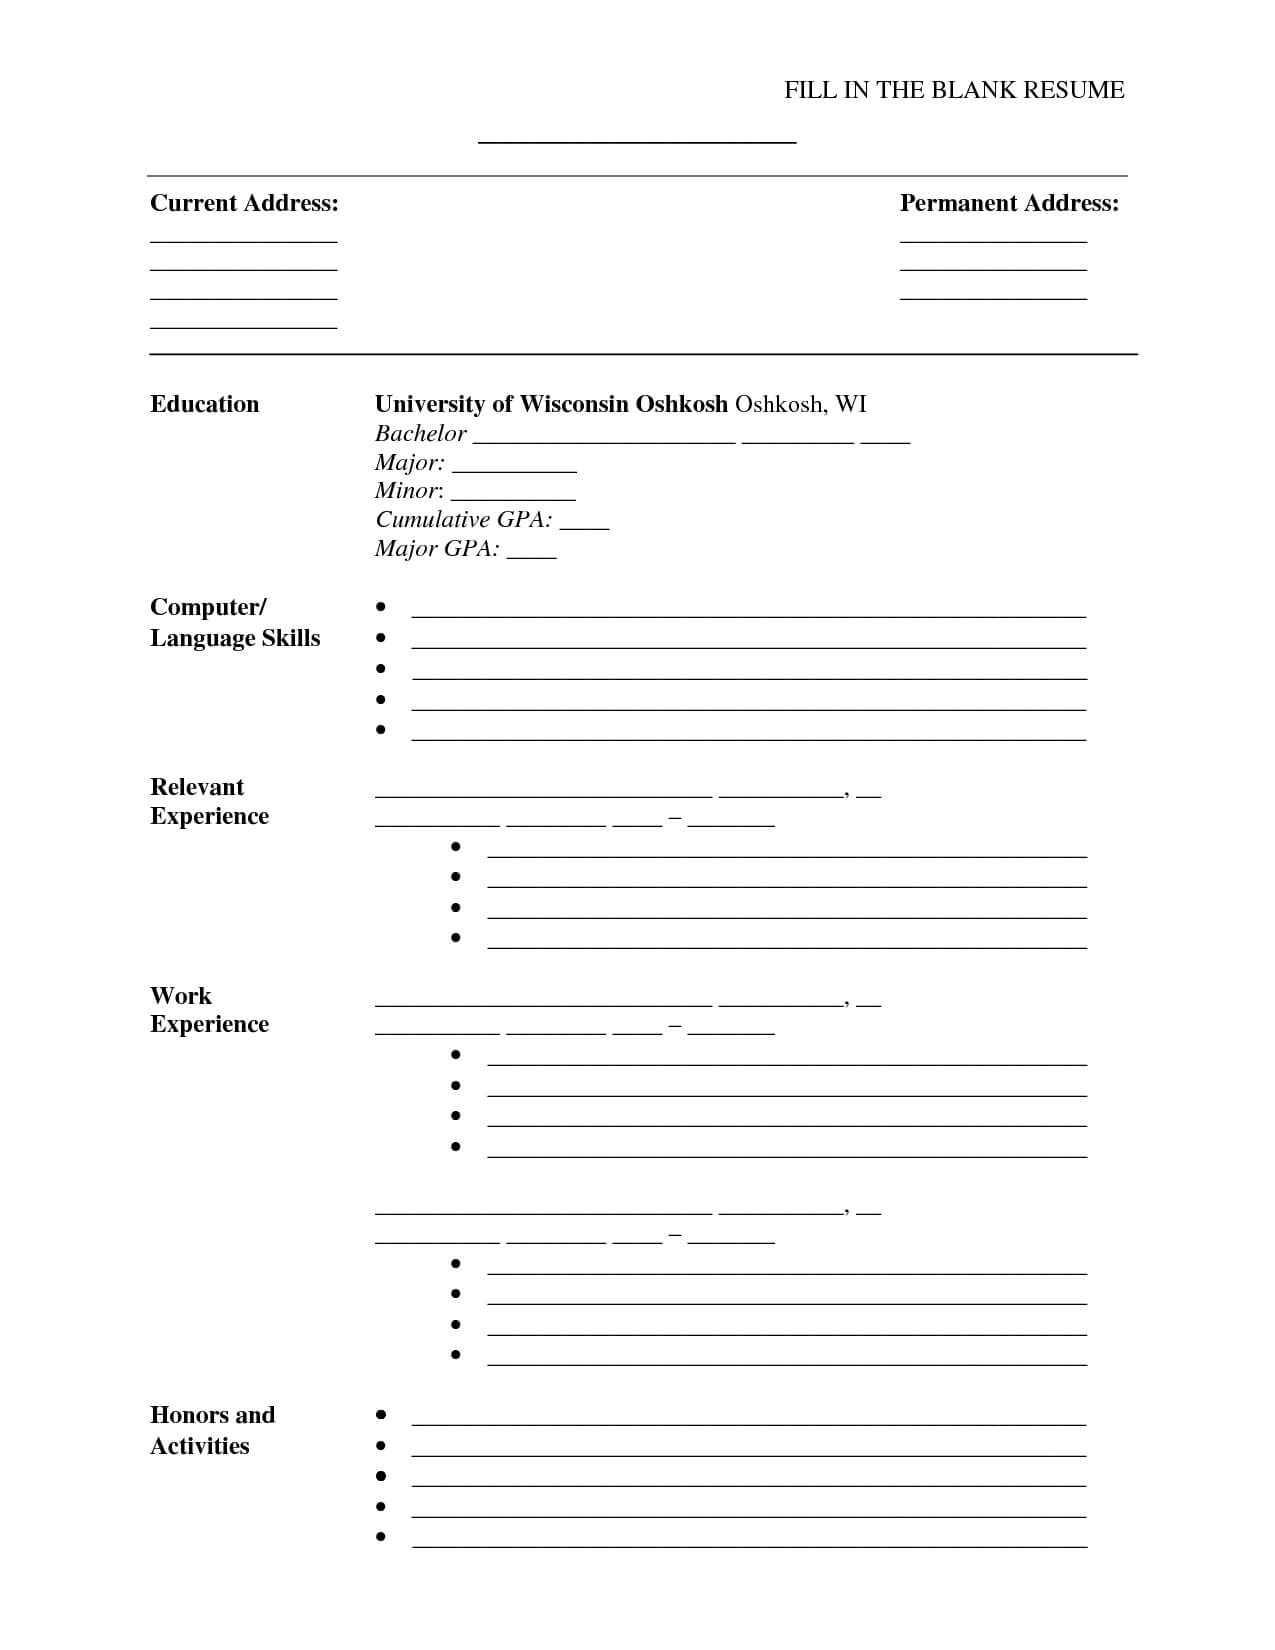 A Cv Template To Fill In | Free Printable Resume, Free Regarding Blank Resume Templates For Microsoft Word